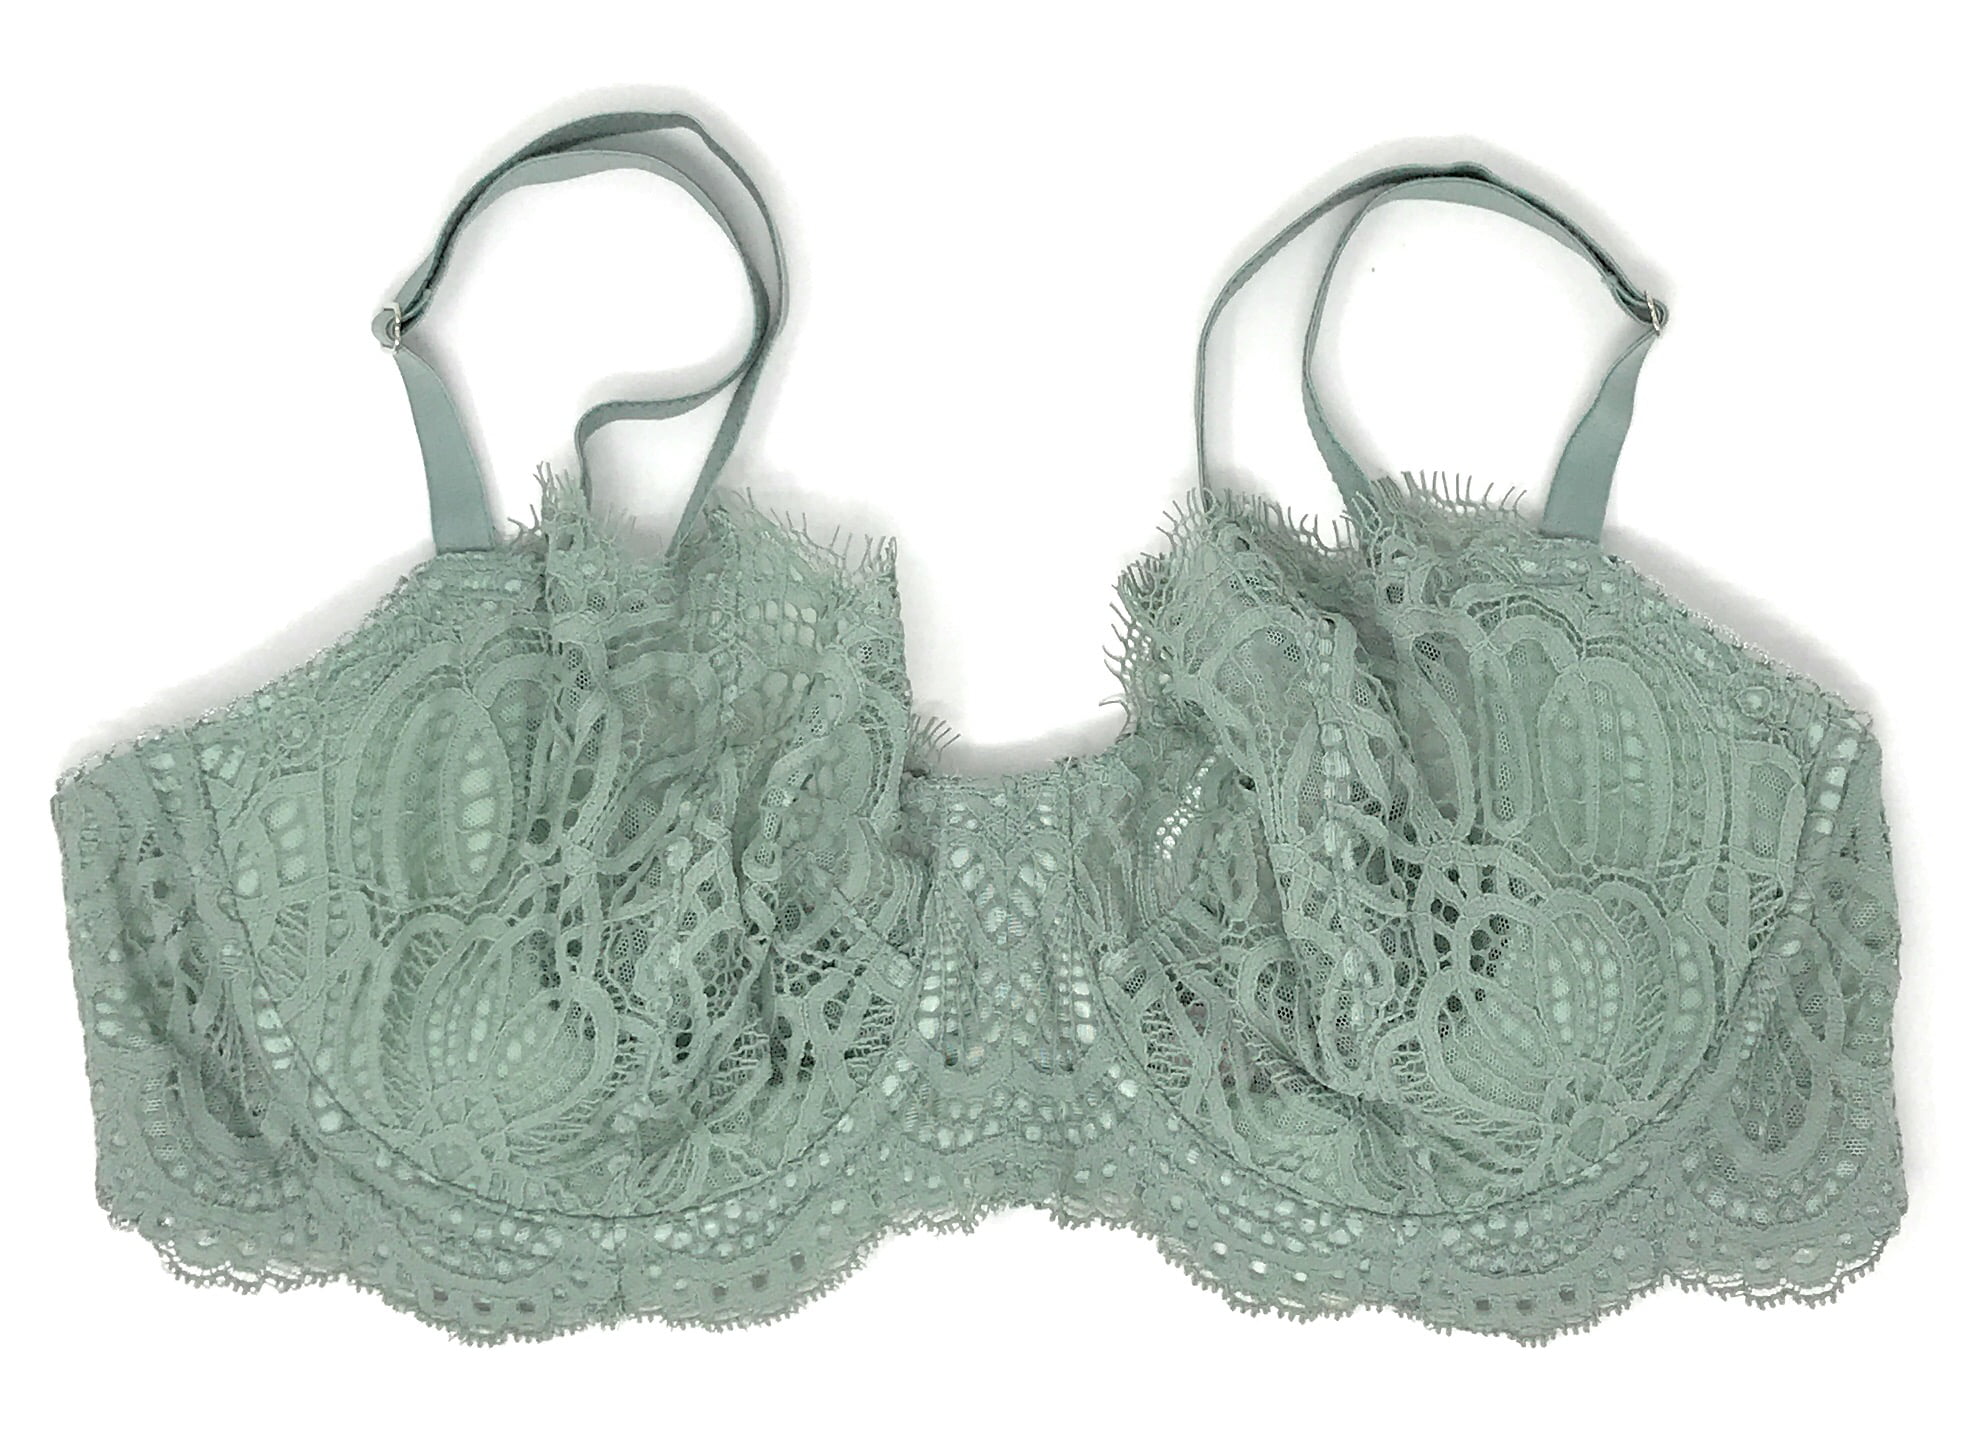 Victoria's Secret - THIS WEEK'S MOST LOVED: Our Dream Angels Wicked Unlined  balconette features a hidden sling for the perfect lift without padding.  For a limited time only 2 for £60.